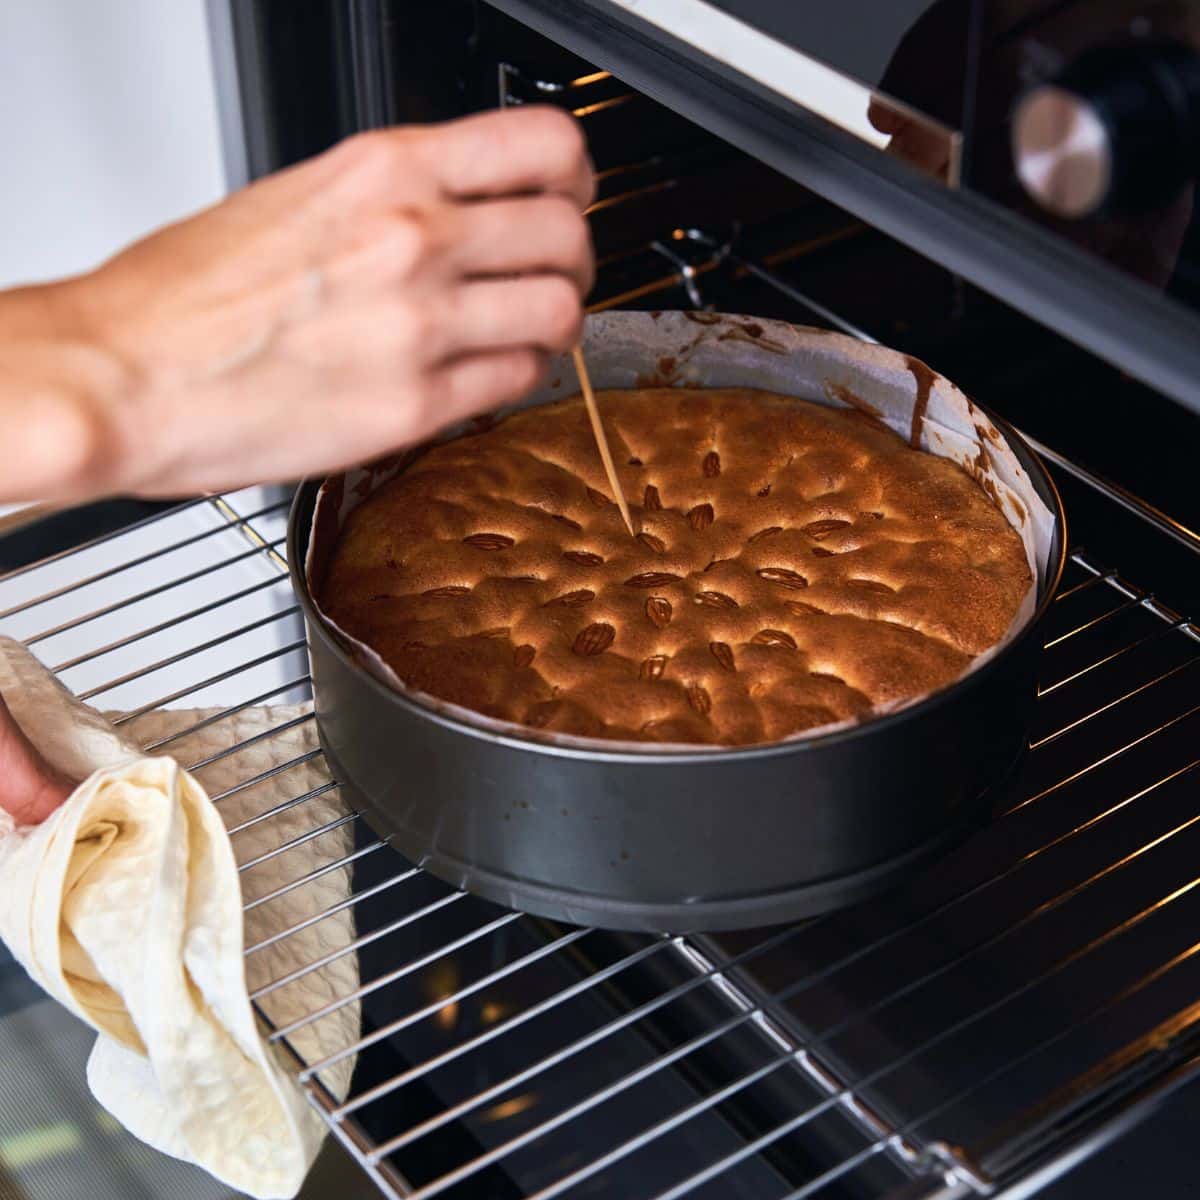 Poking a toothpick into a baked cake to see if it is done baking.